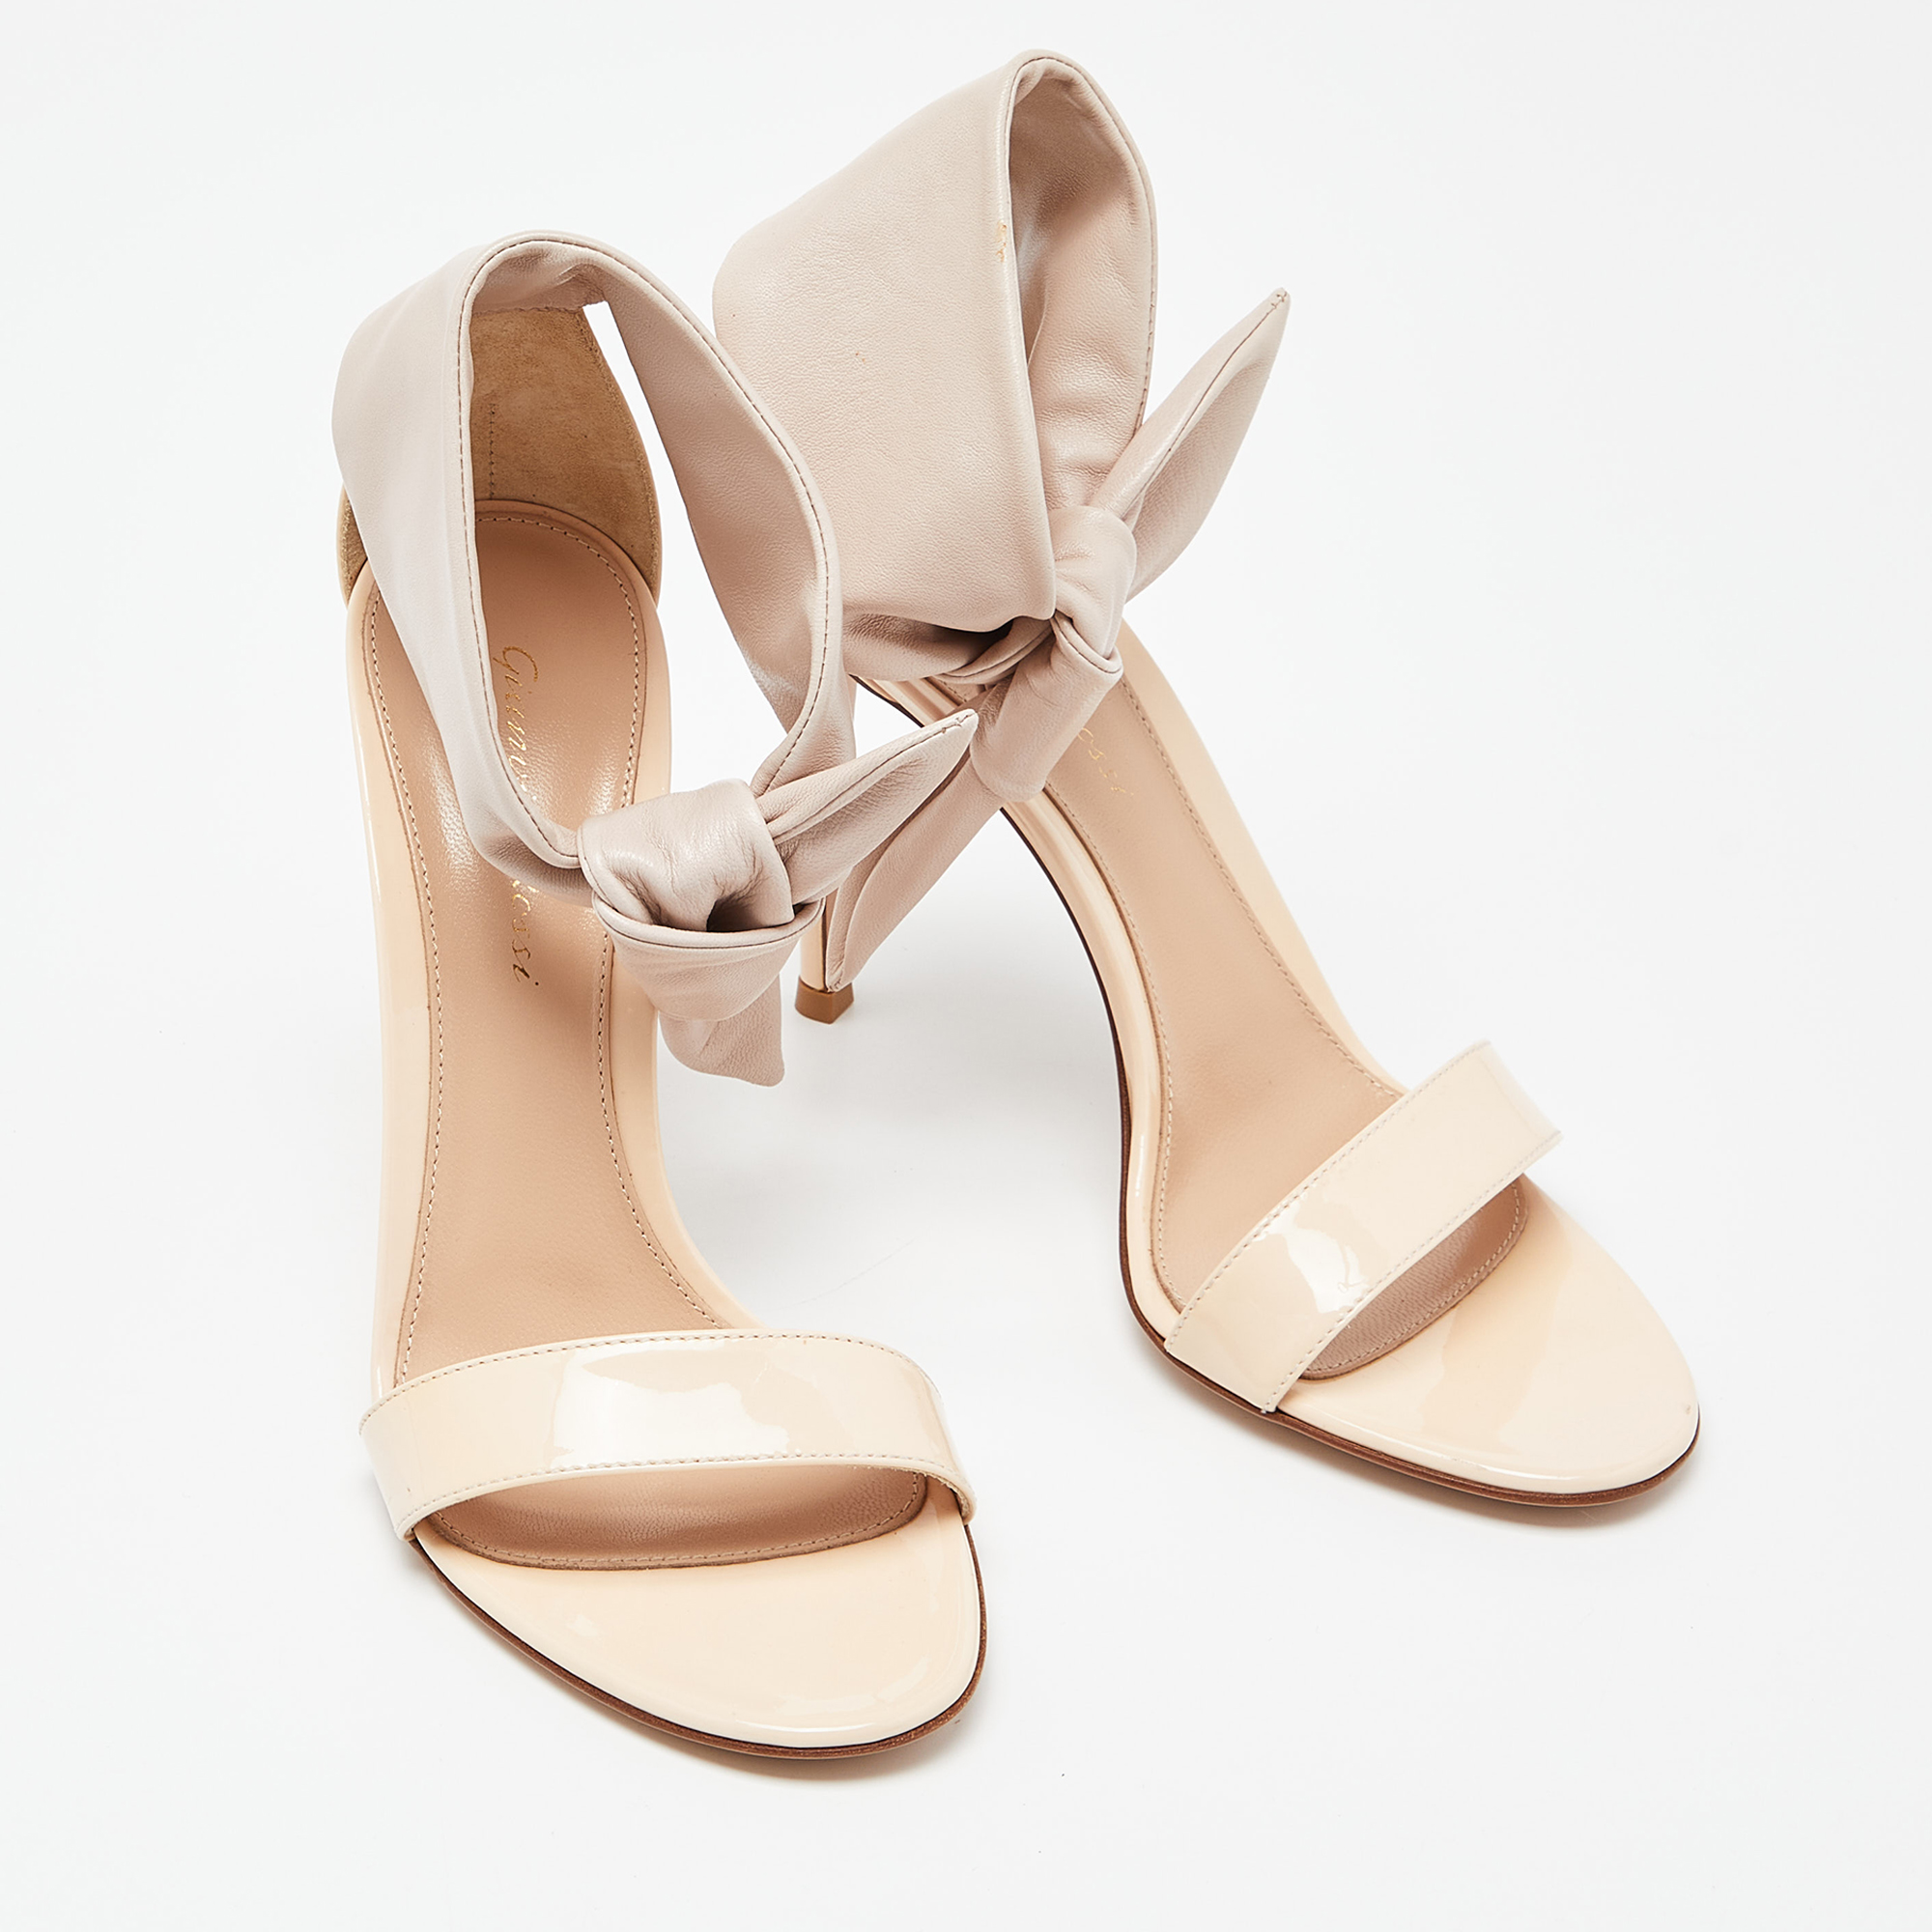 Gianvito Rossi Beige Patent Leather Ankle Cuff Sandals Size 38